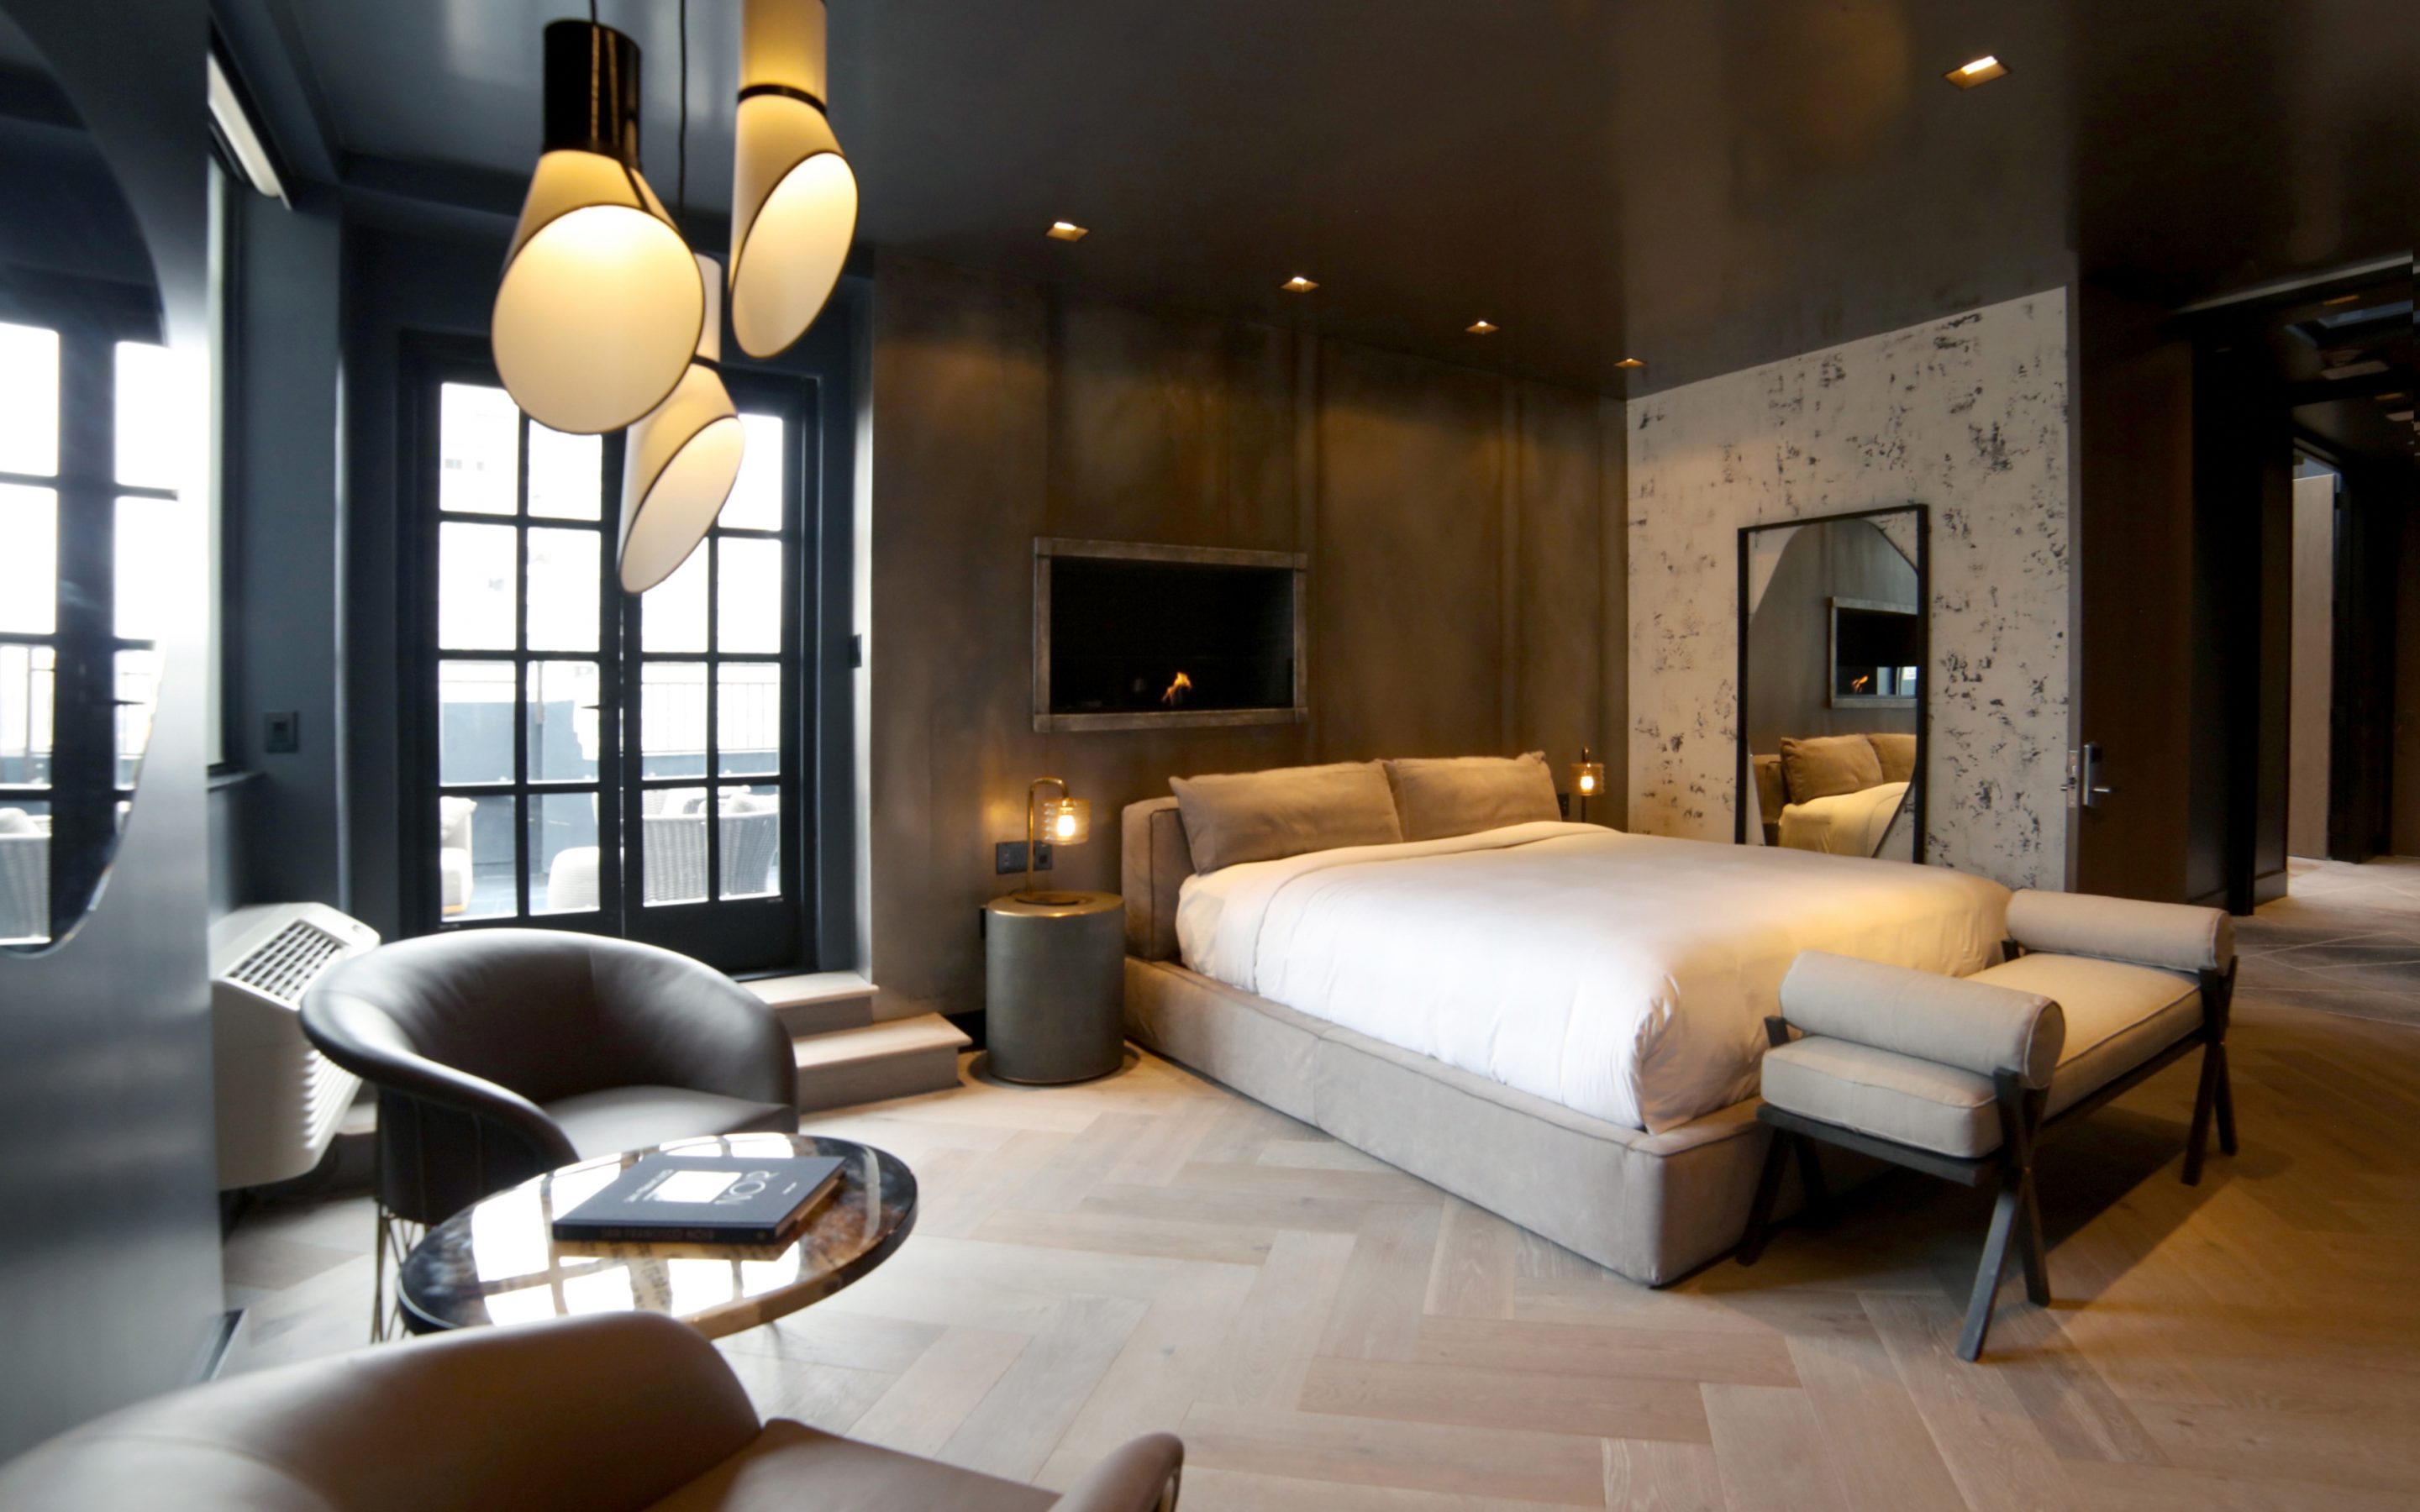 7×7- “Union Square’s Hotel G Debuts Three Sultry Penthouse Suites”